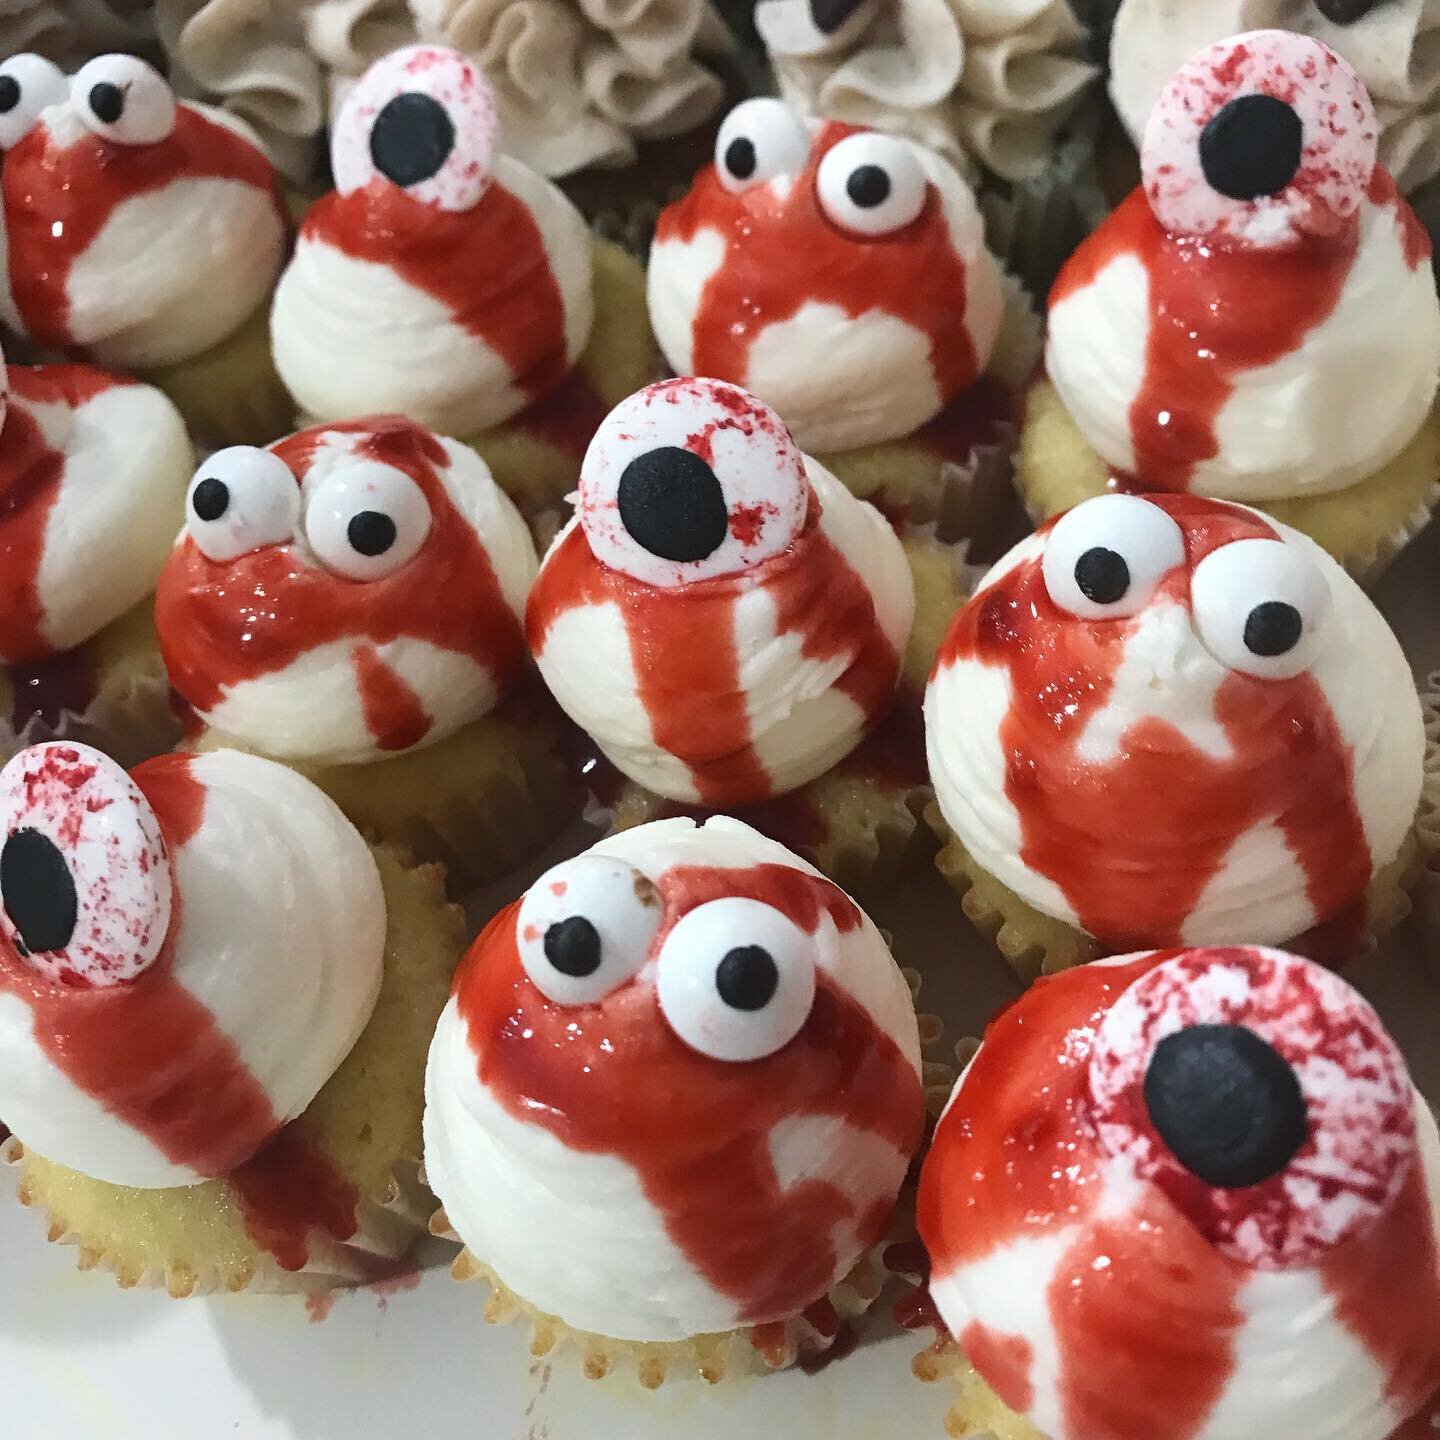 Our army of zombie mini Honey Whiskies are still celebrating Halloween even though it&rsquo;s technically over 🧟&zwj;♂️👻
.
.
.
.
.
.
.
#phillybaker #phillybakery #boozy #cupcakes #eatadelphia #foodphotography #philly #phillygram #foodie #foodgasm #